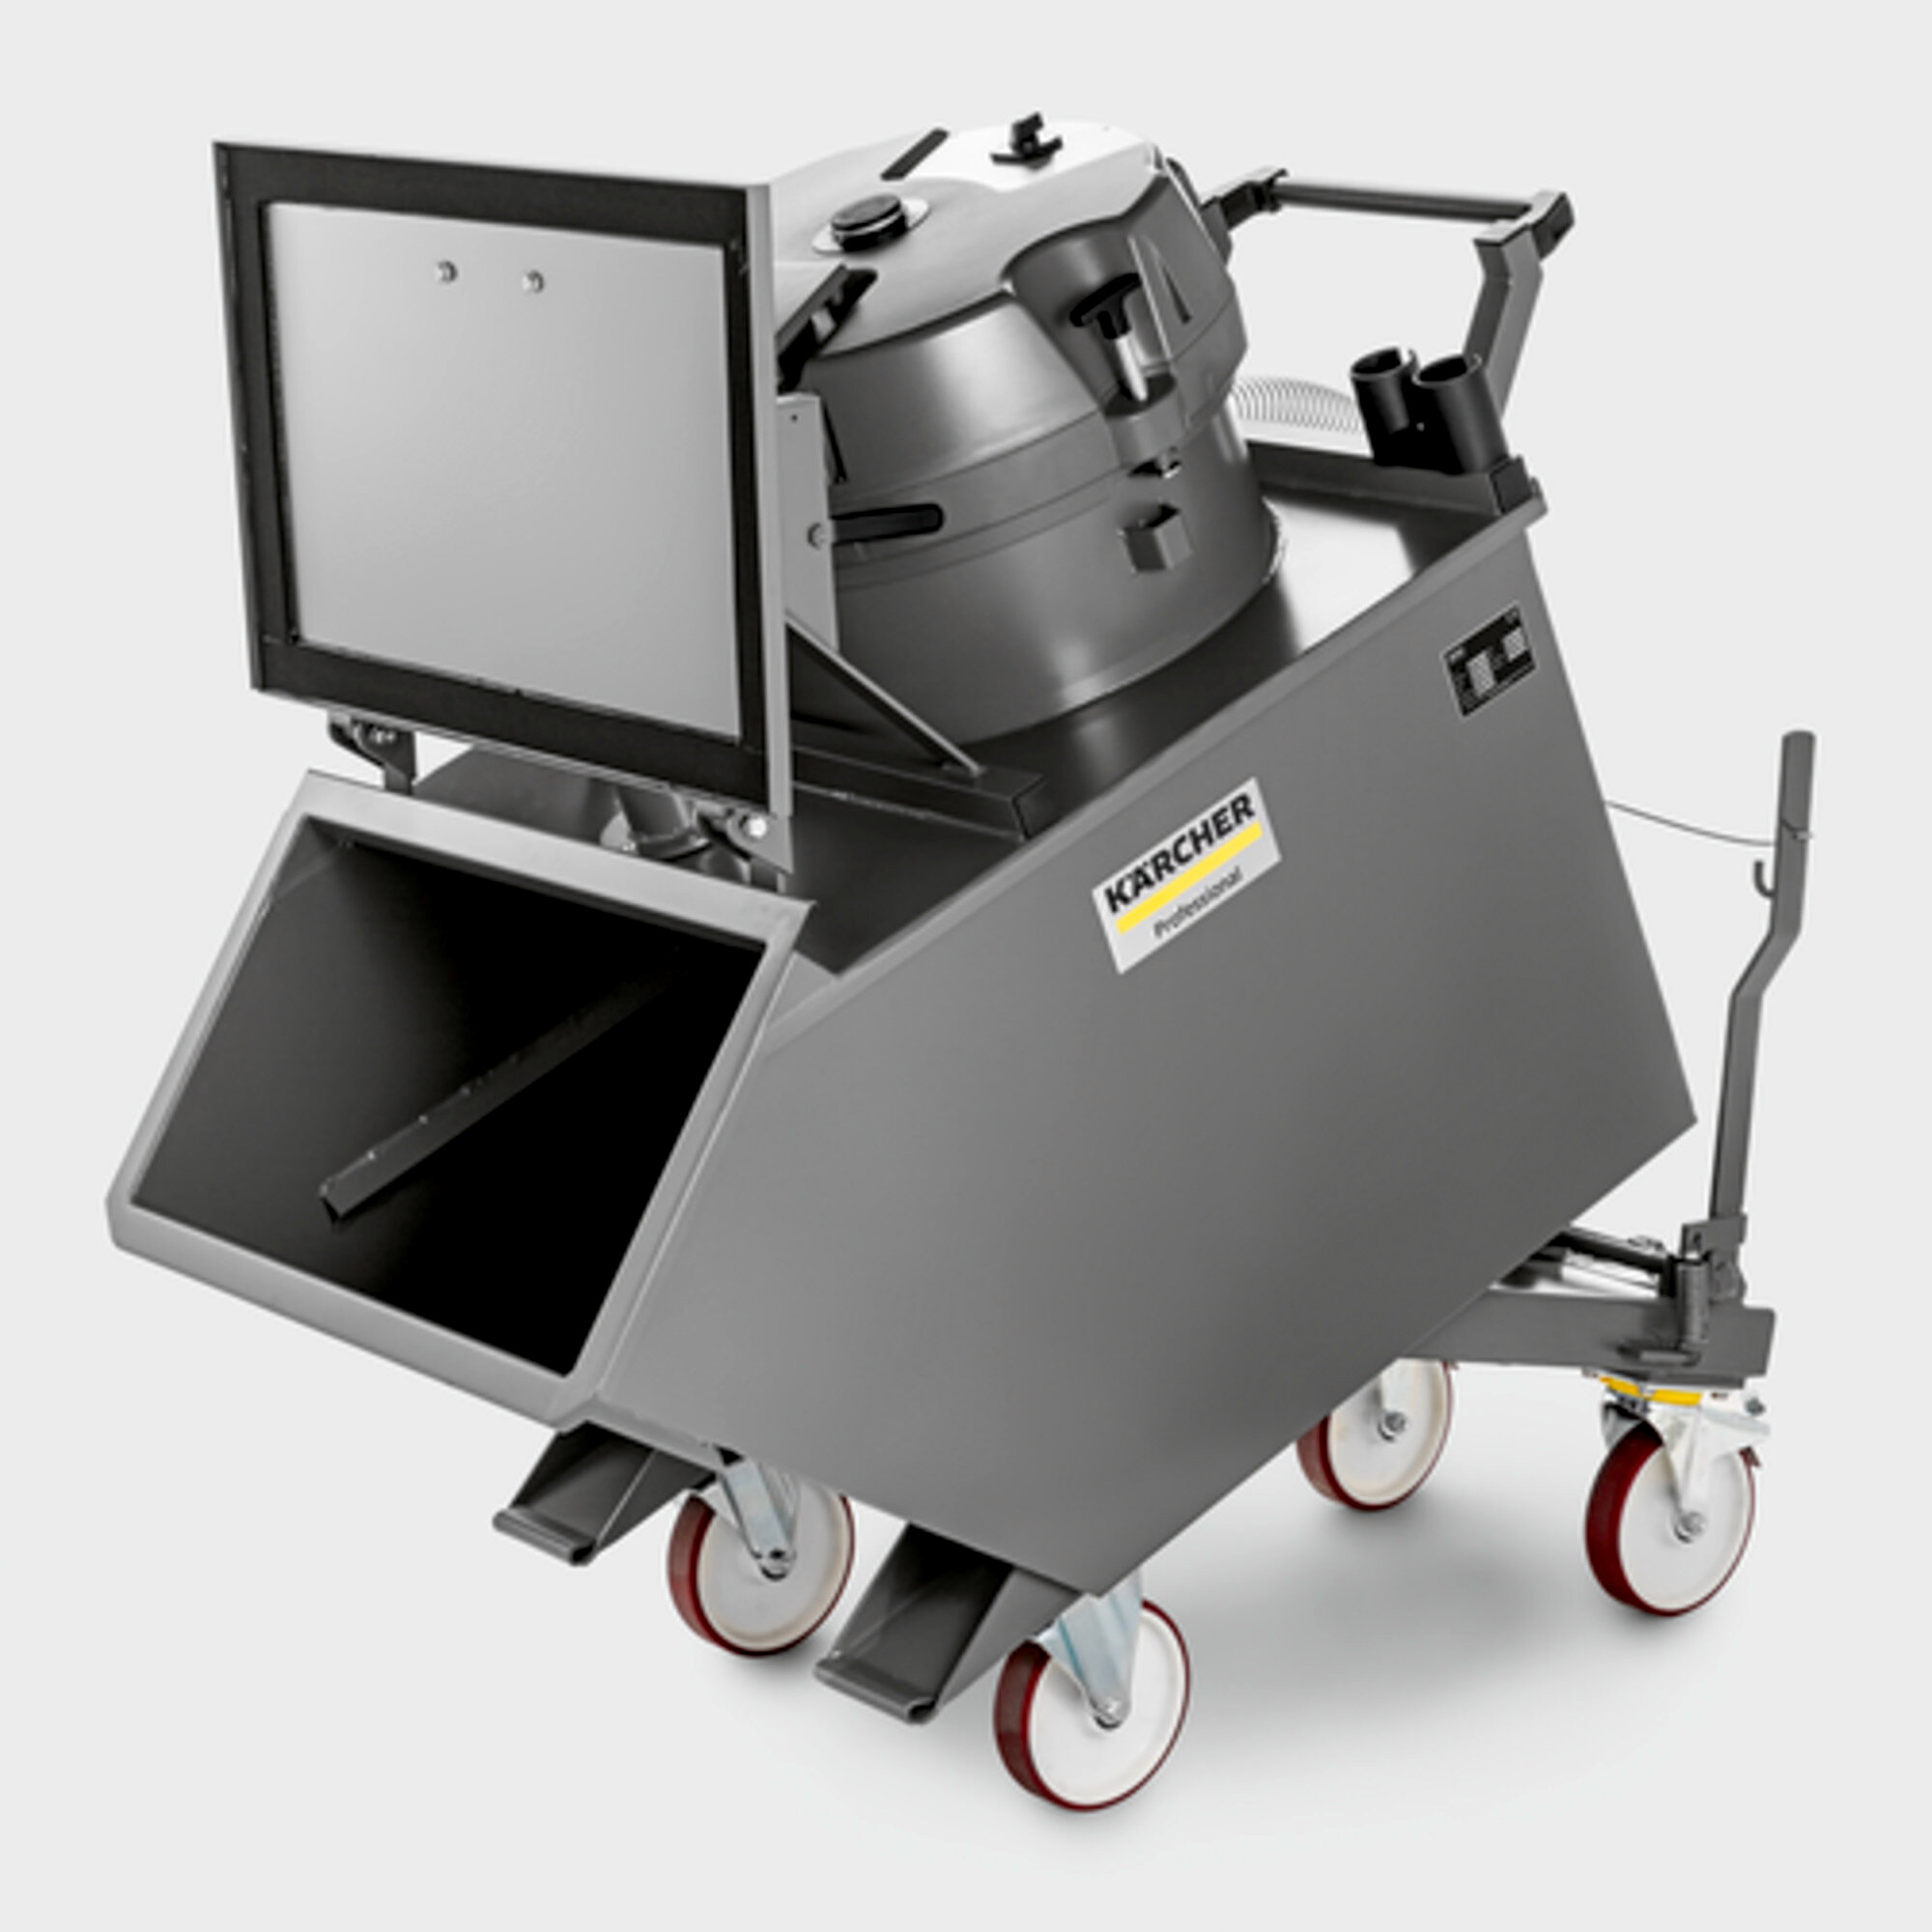  IVR-L 400/24-2 Tc: Emptying system with a tilting chassis enables safe manual emptying